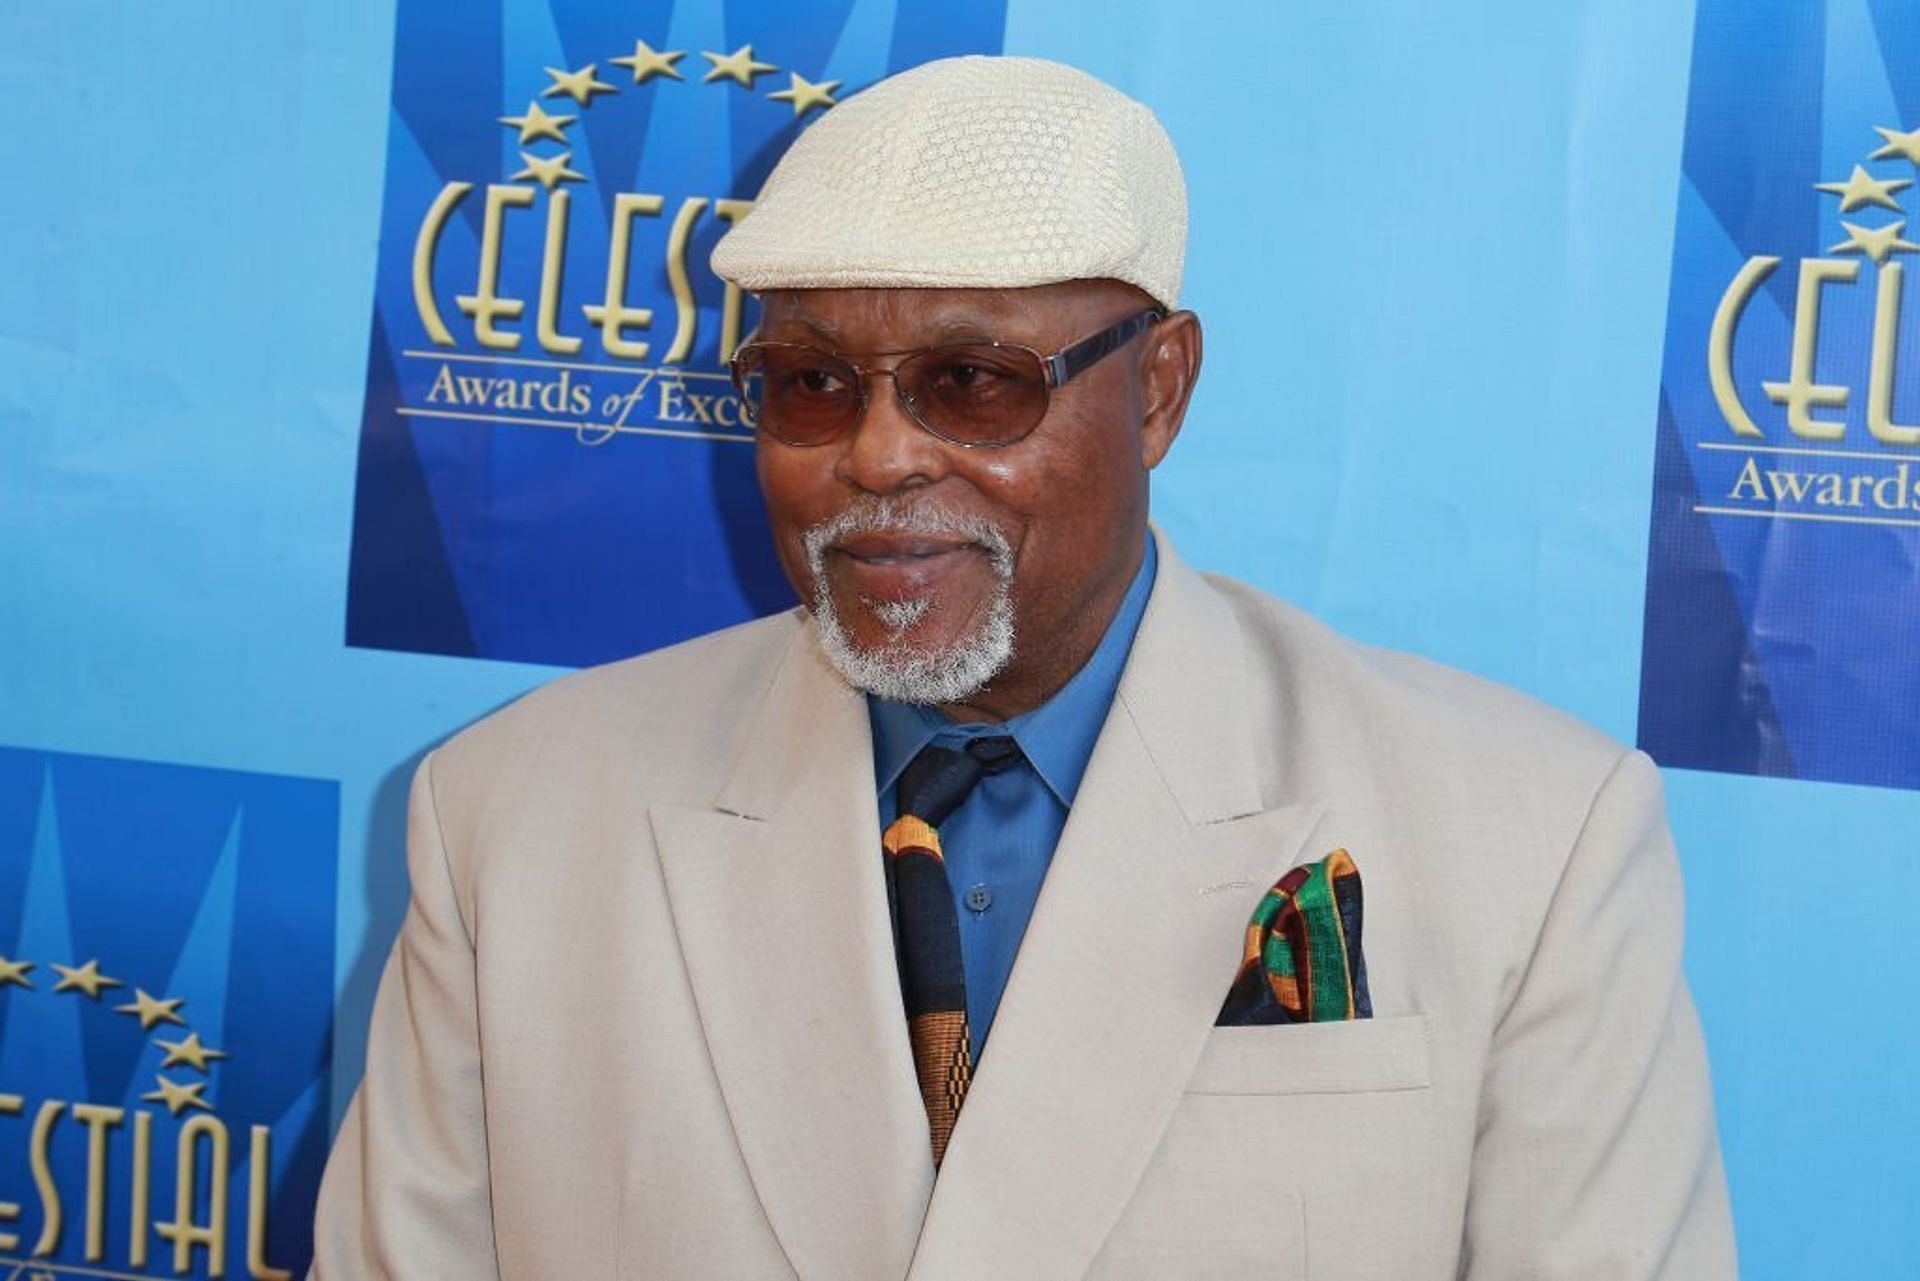 Roger E. Mosley died at the age of 83 (Image via Leon Bennett/Getty Images)